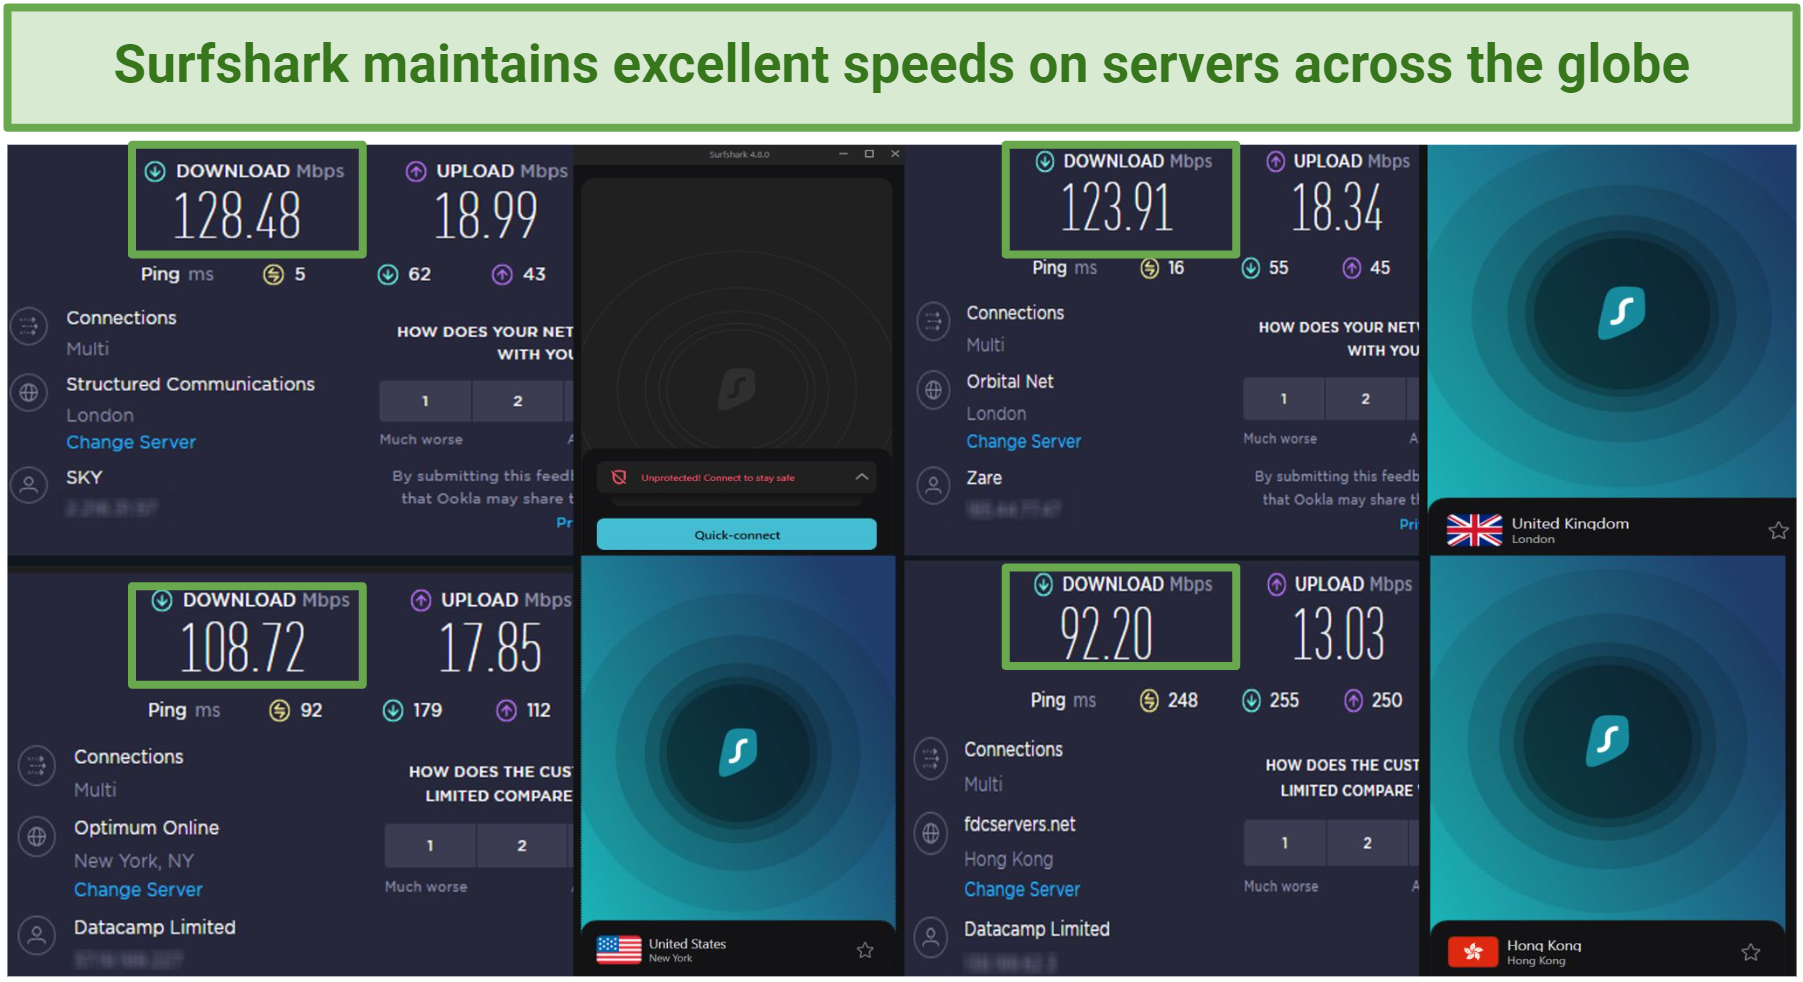 Pictures of Surfshark's VPN speed test on servers in the US, UK, and Asia (Hong Kong)